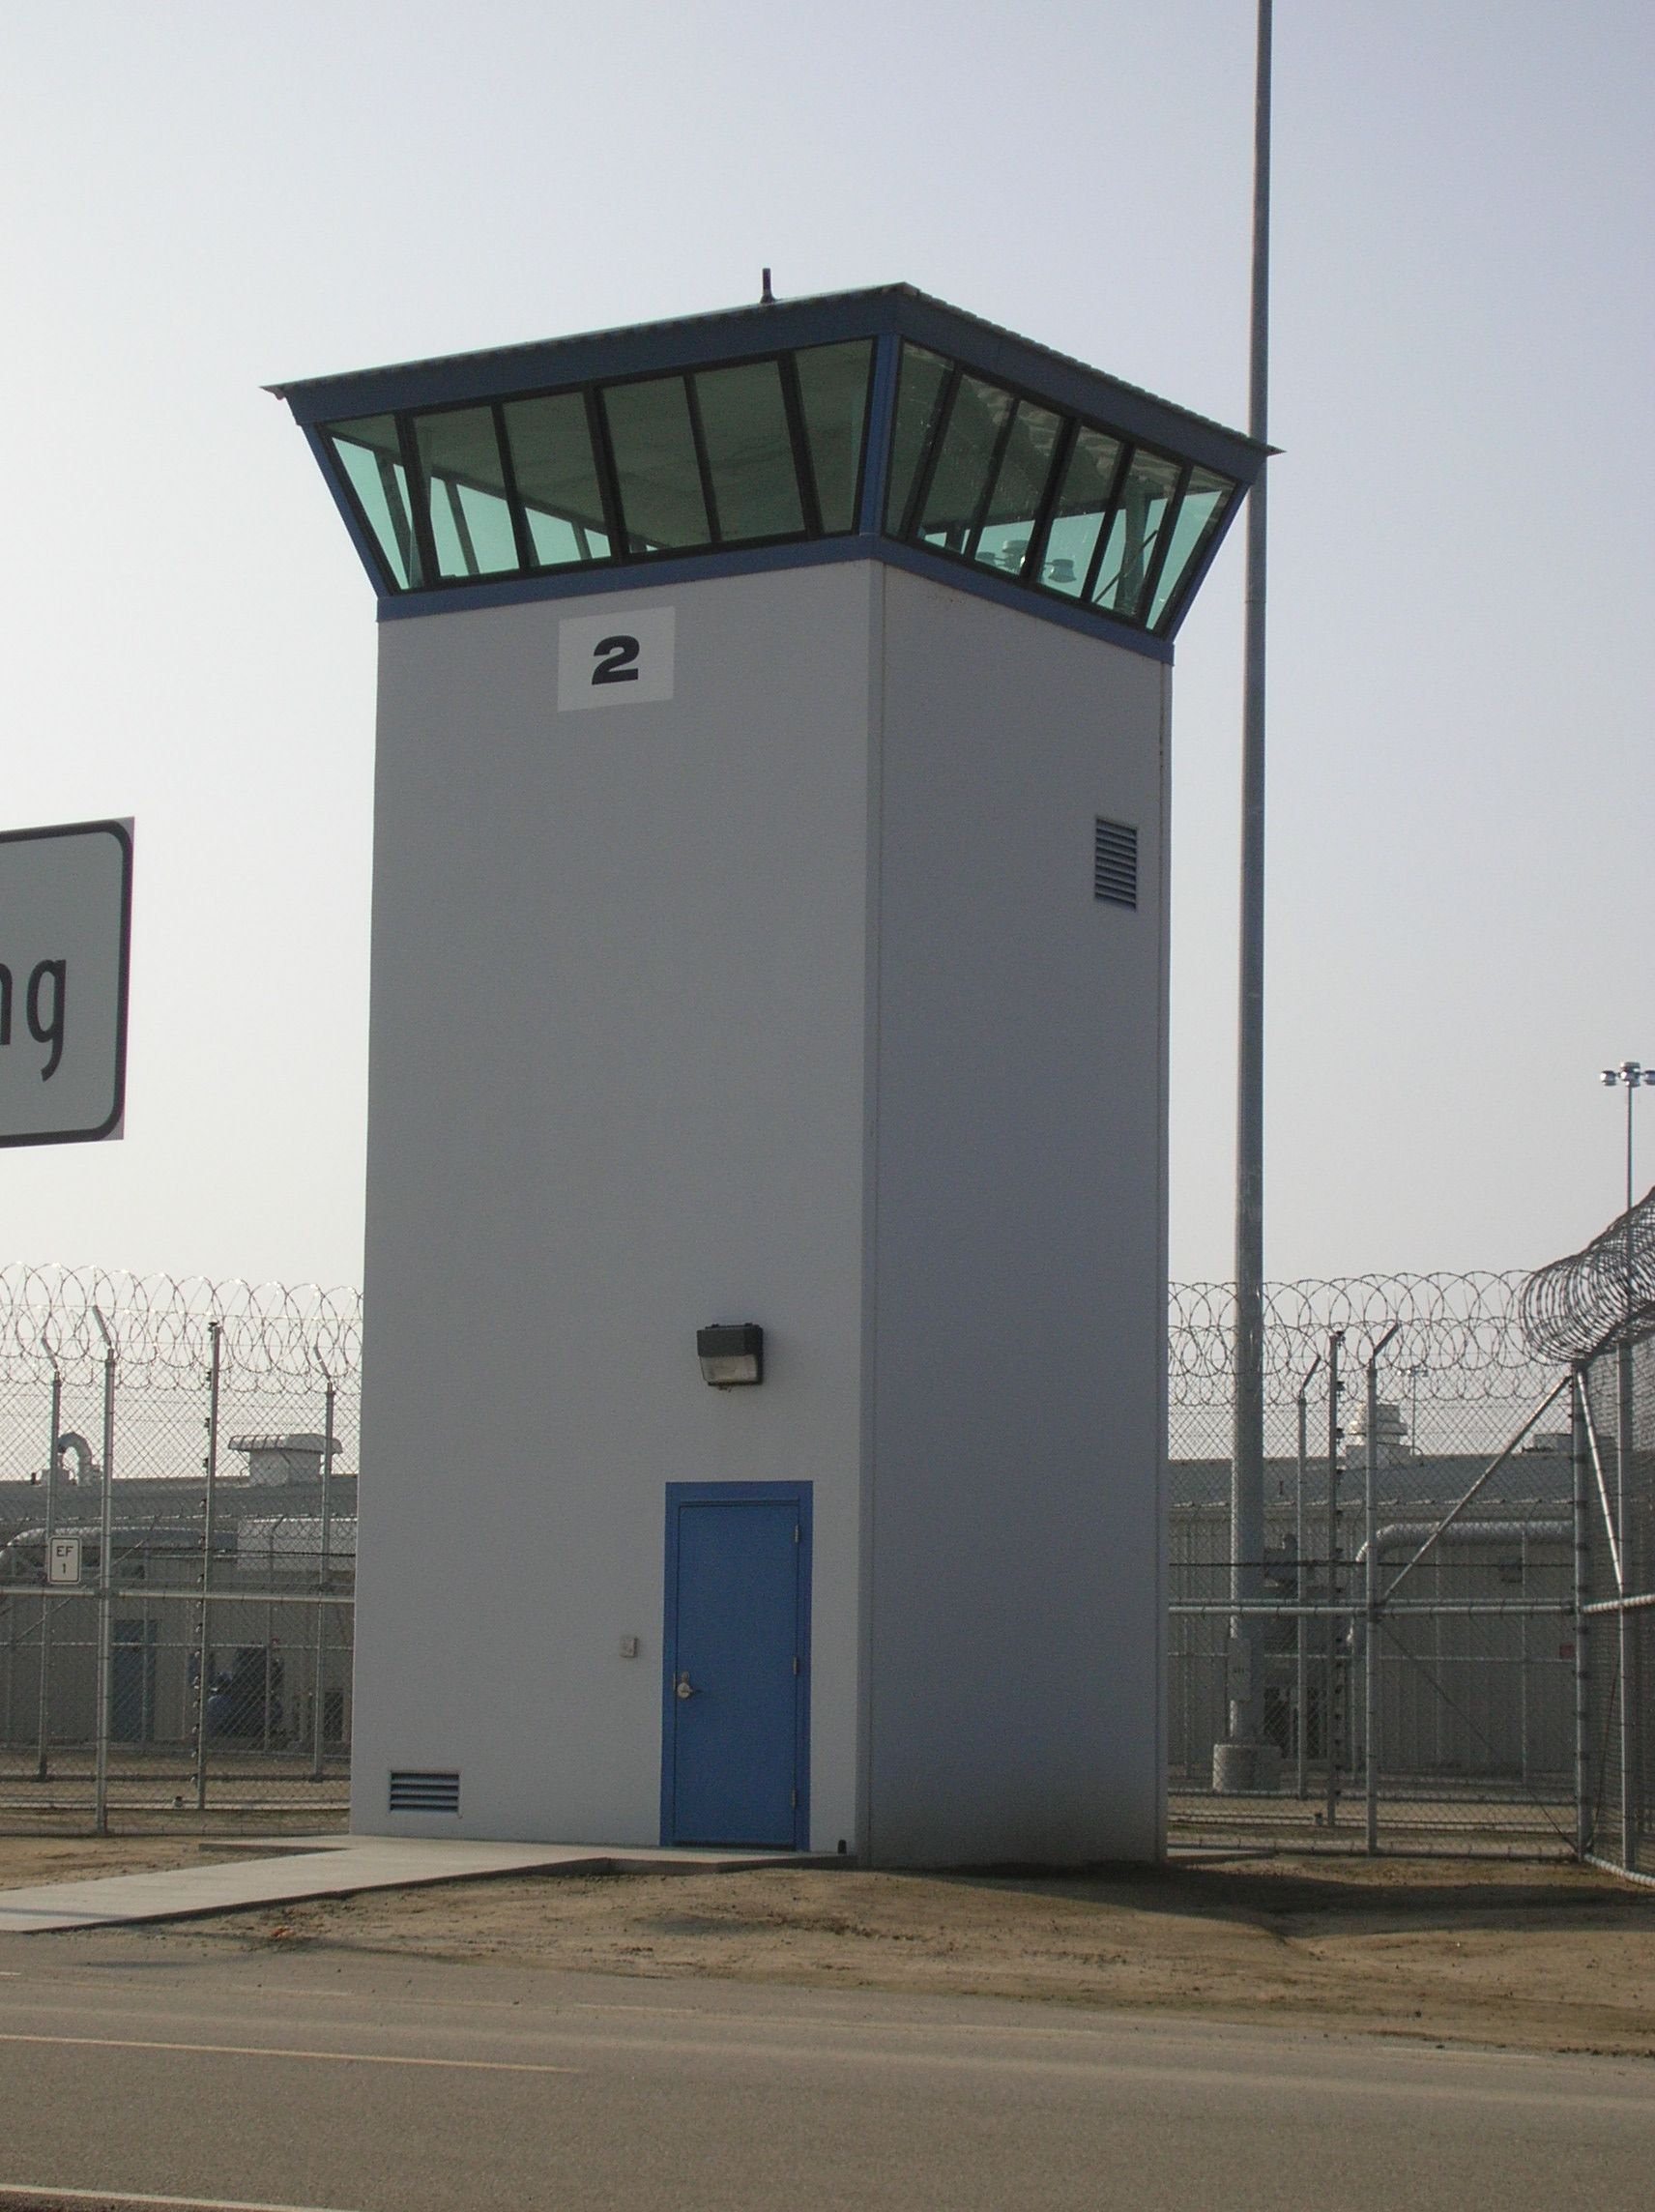 prison watchtower - Google Search | Reference (Prison) | Pinterest ...